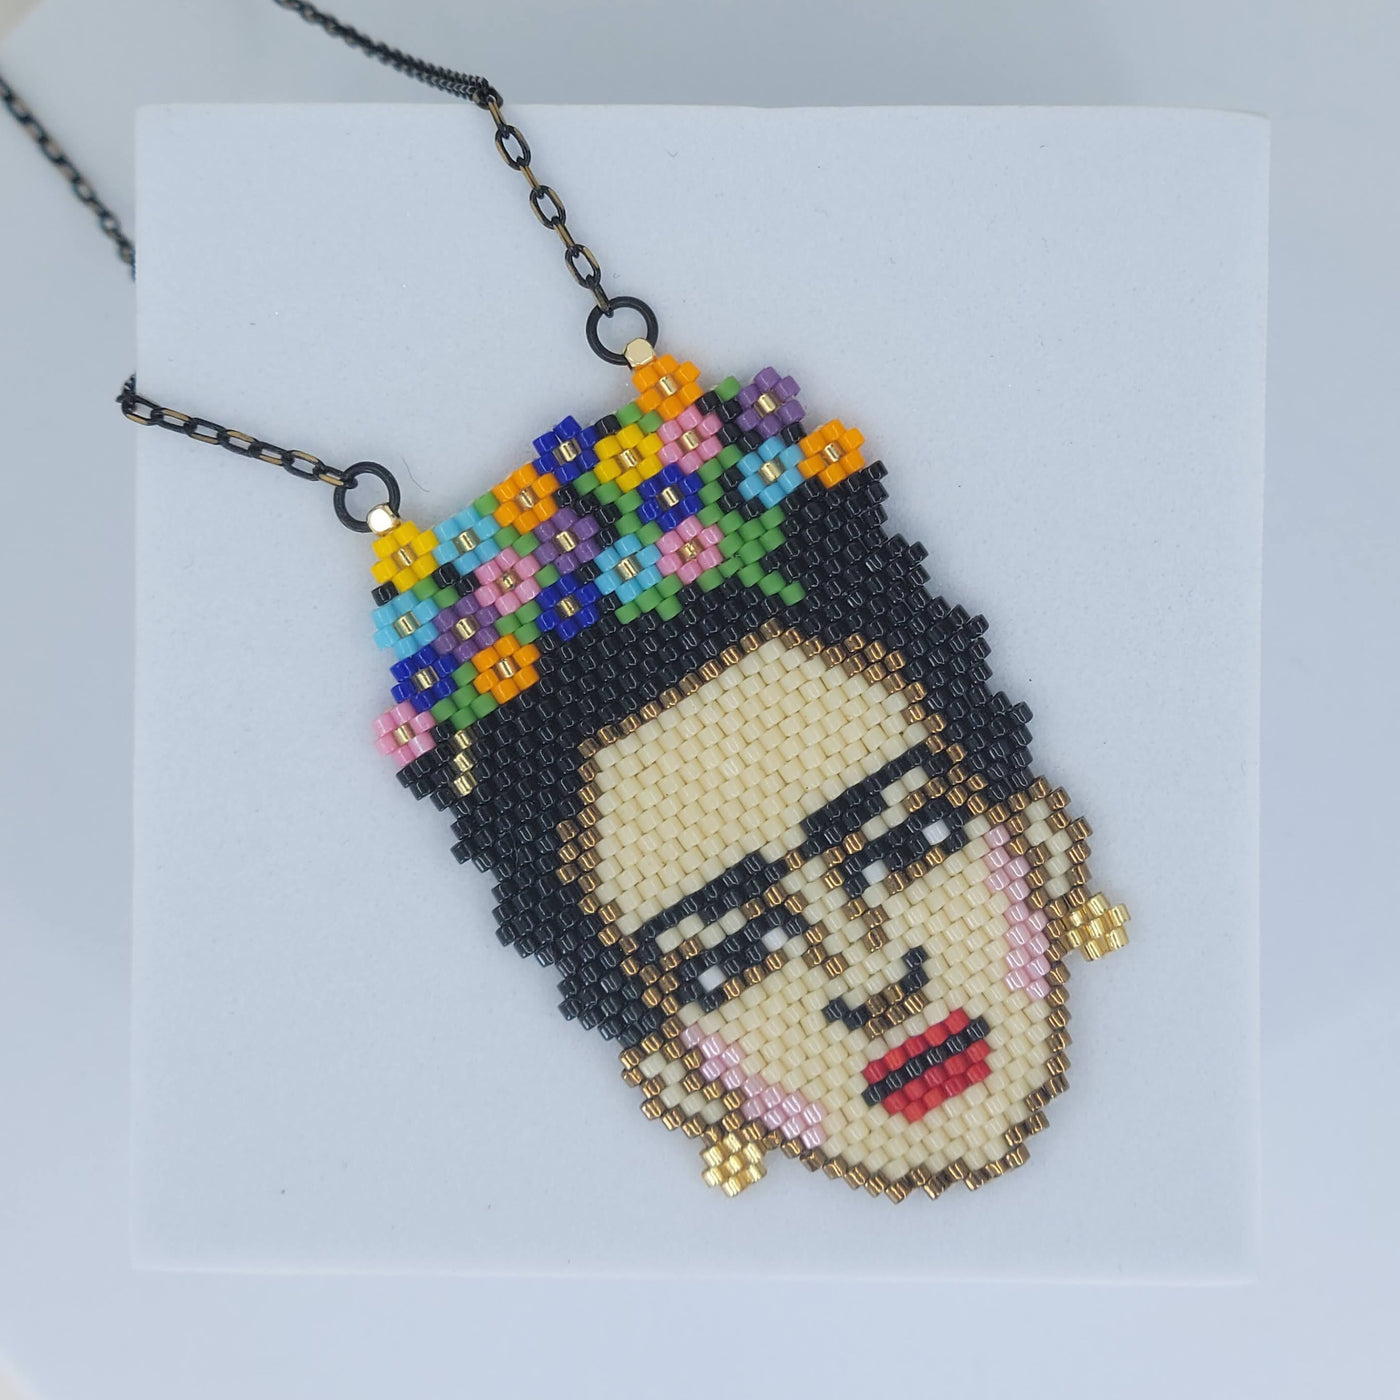 Frida Kahlo Necklace with Floral Bouquet Headband